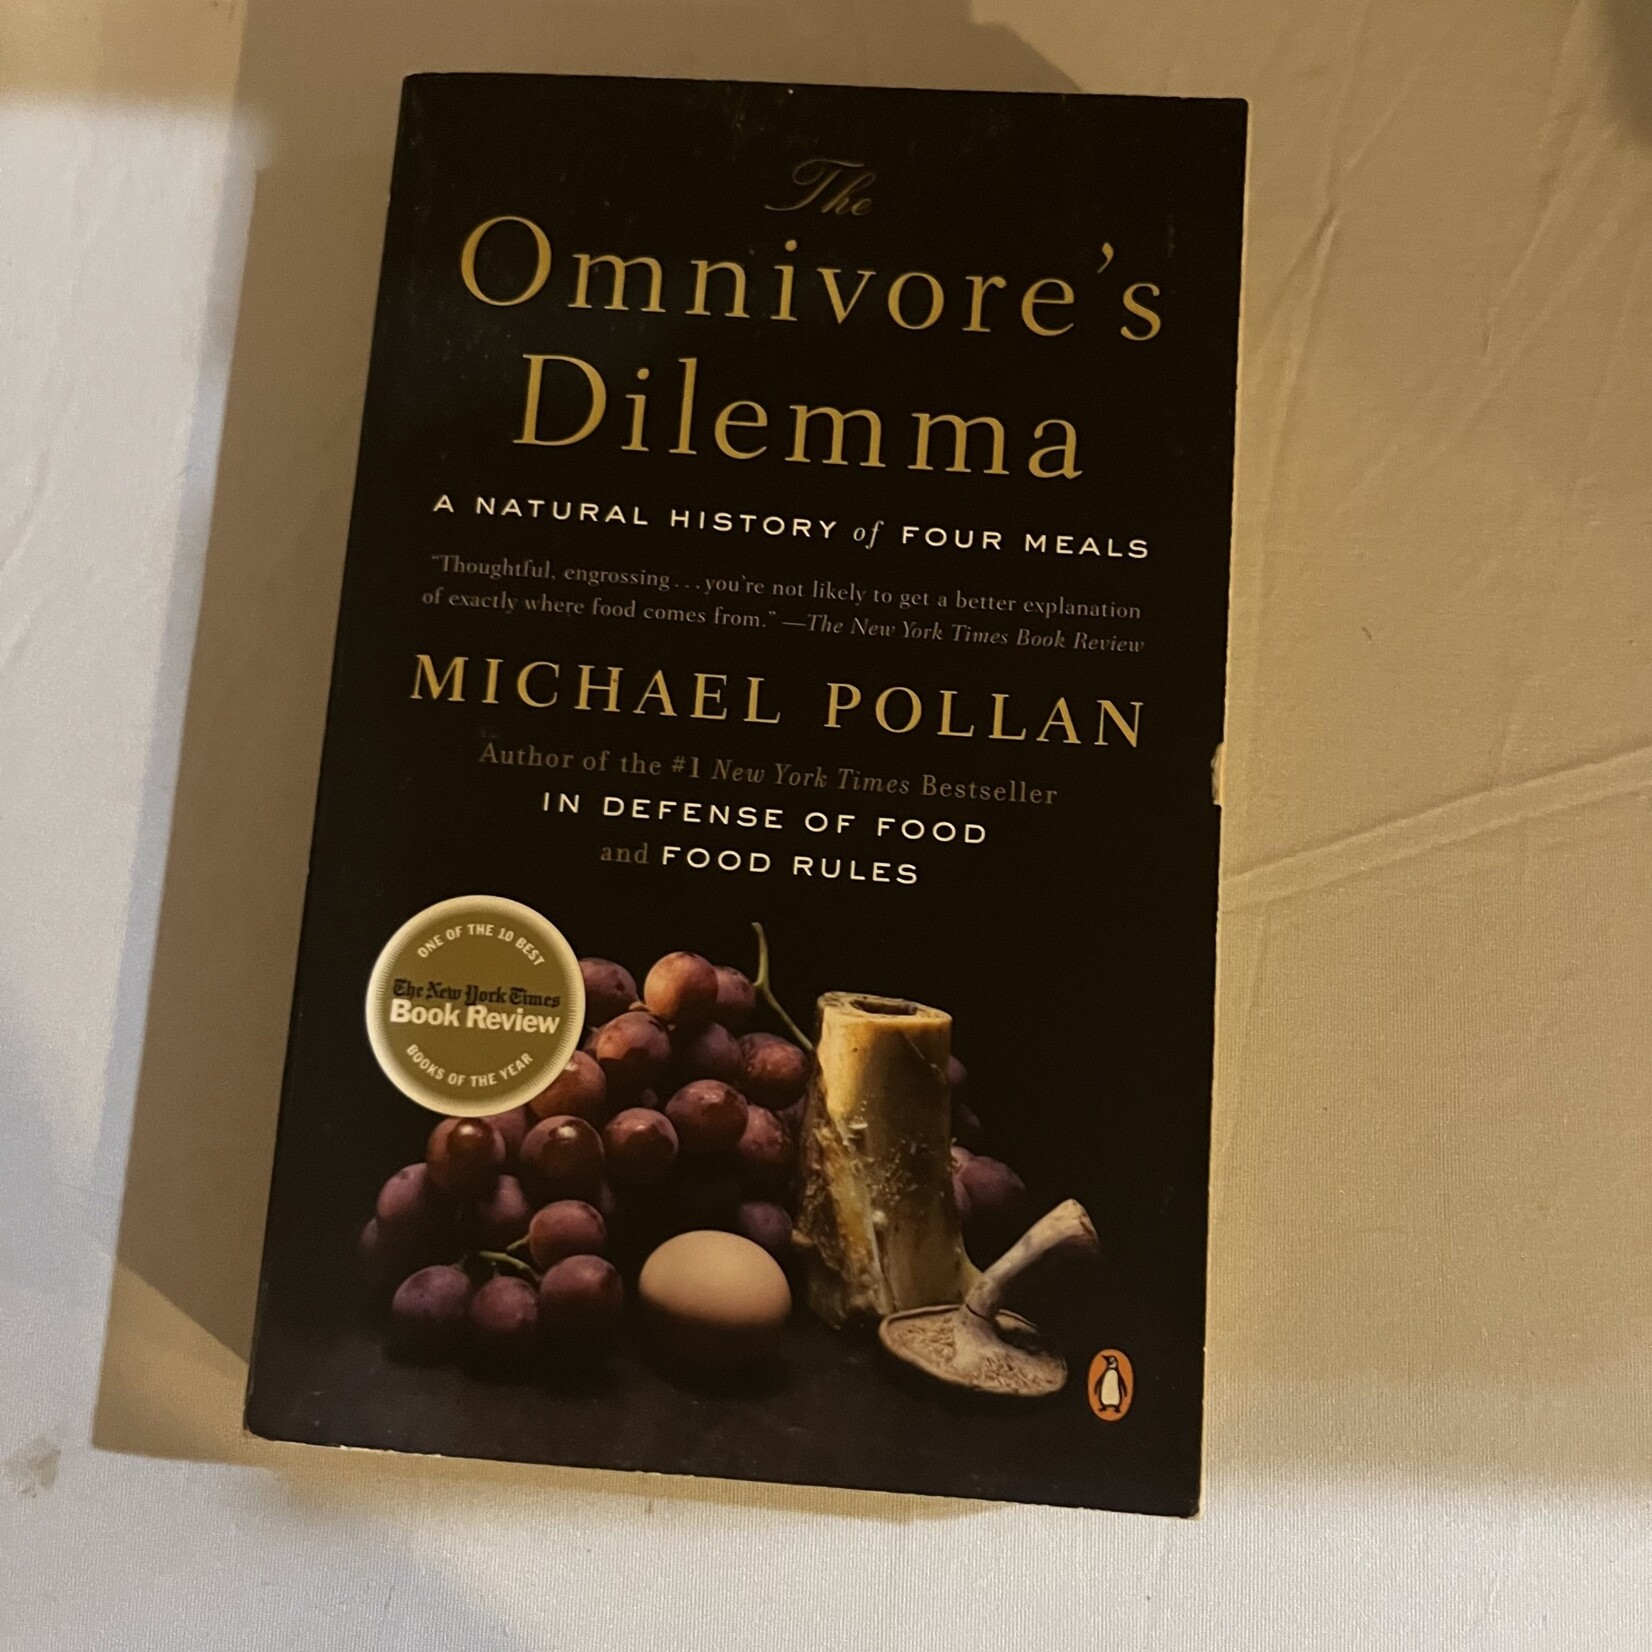 The Omnivore's Dilemma - A Nutal History of Four Meals